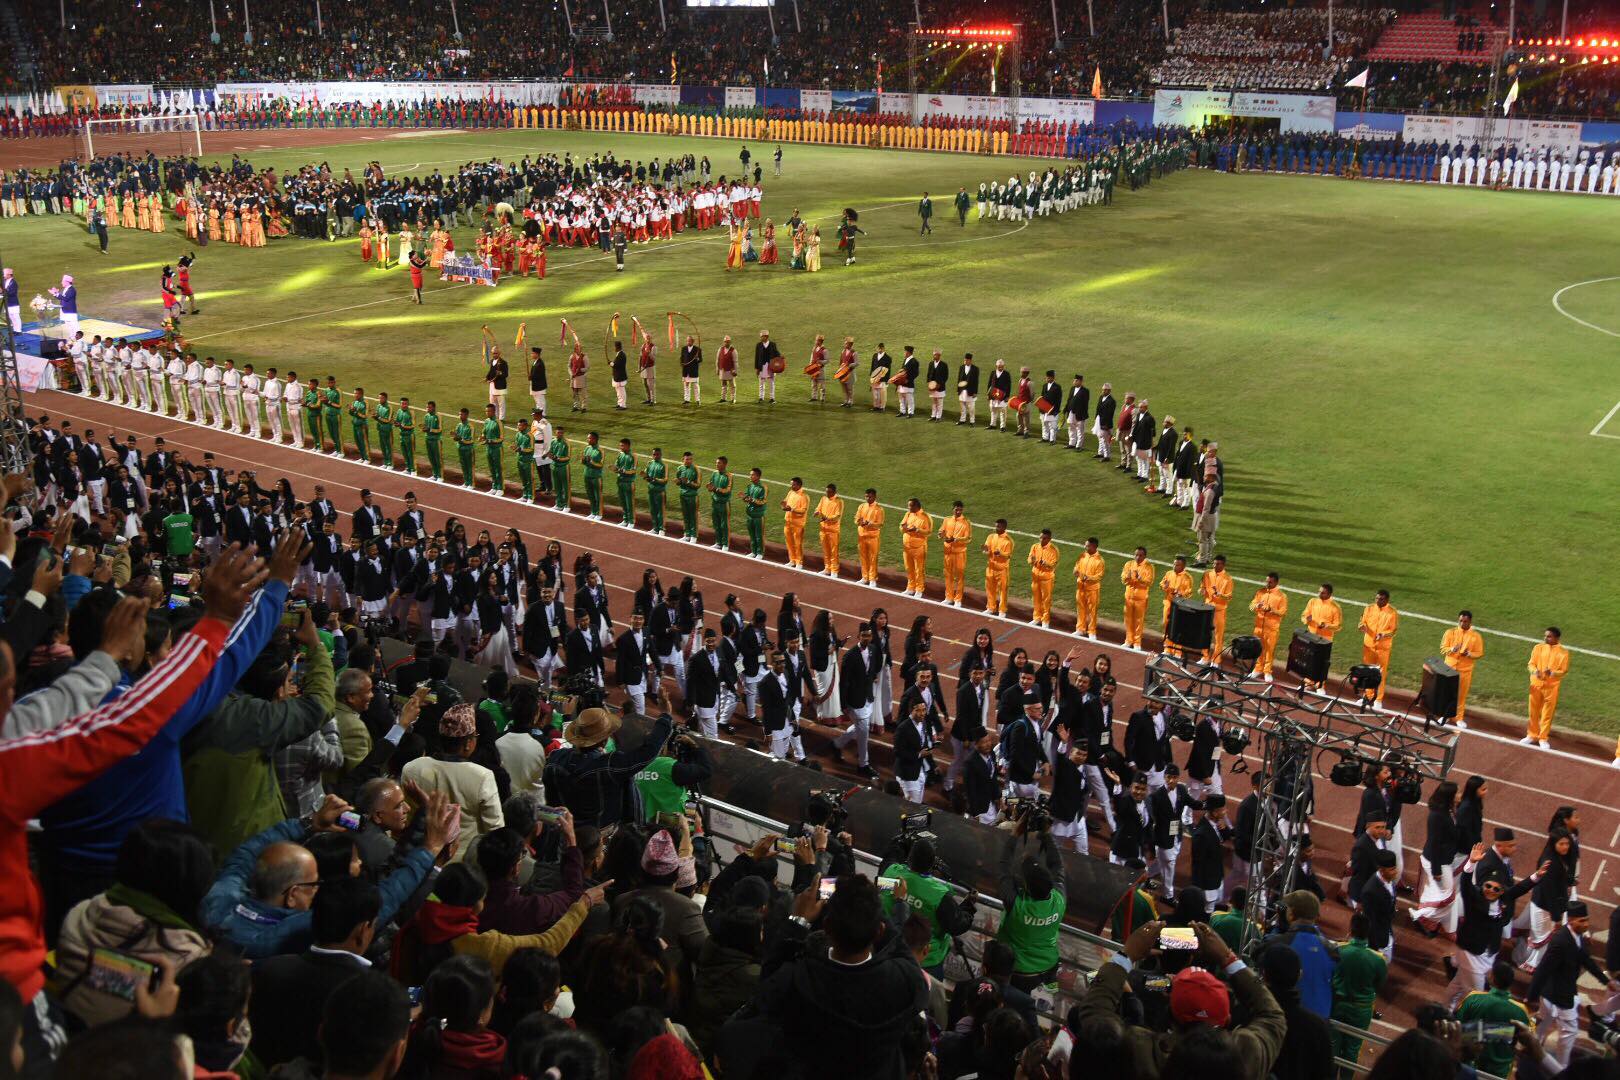 These photos show the official opening of the 13th South Asian Games